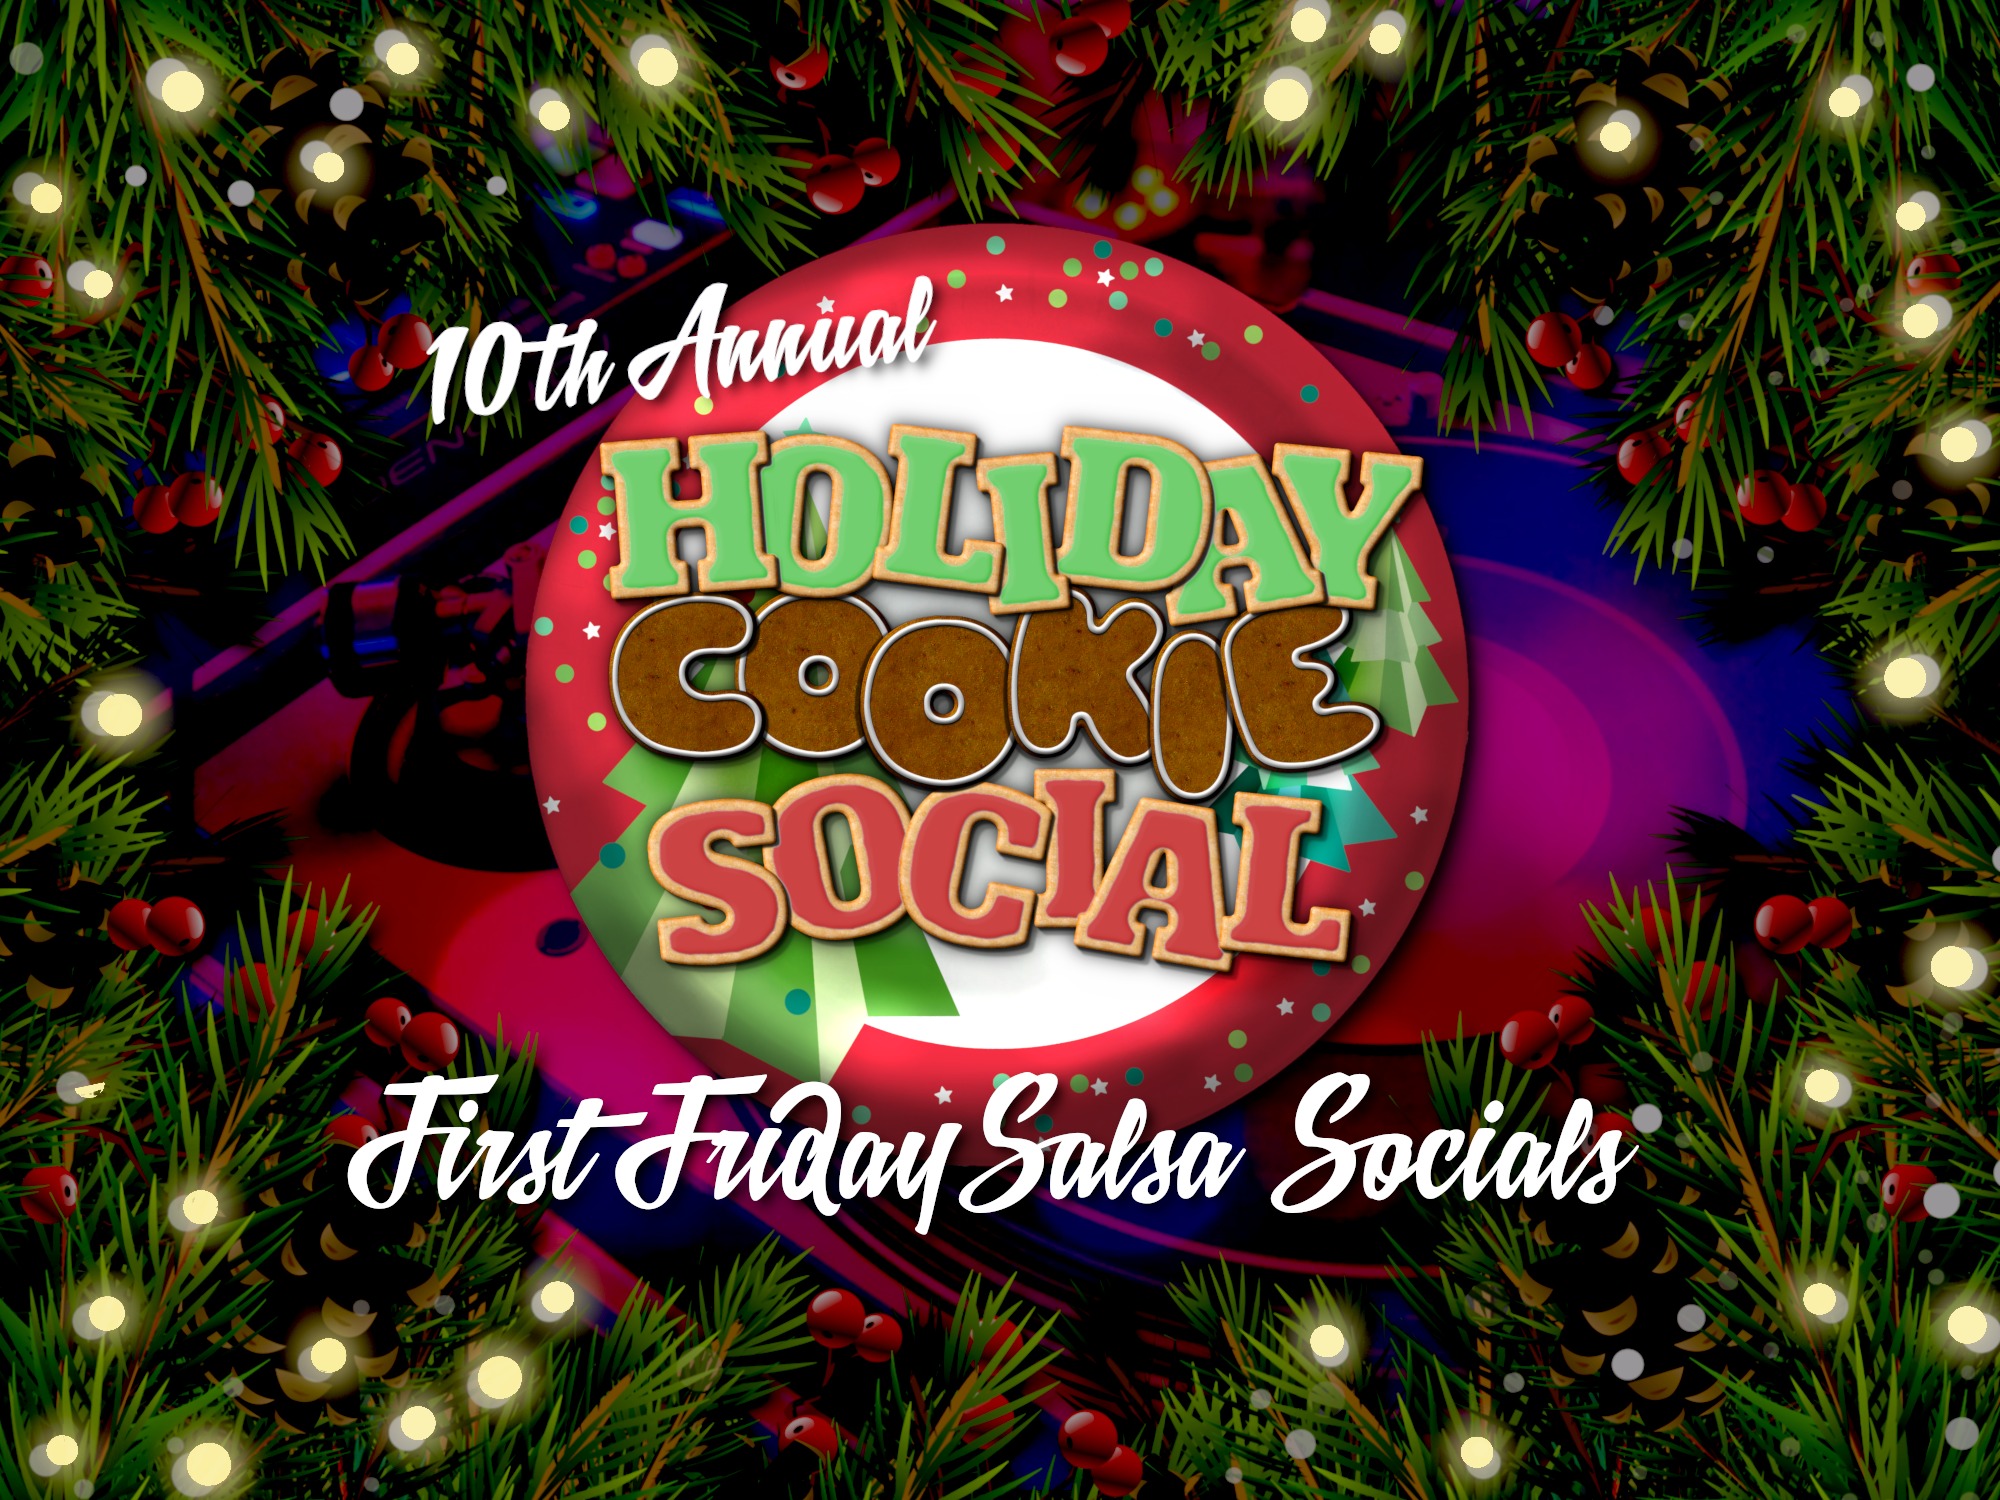 First Fridays Holiday Social & Cookie Contest